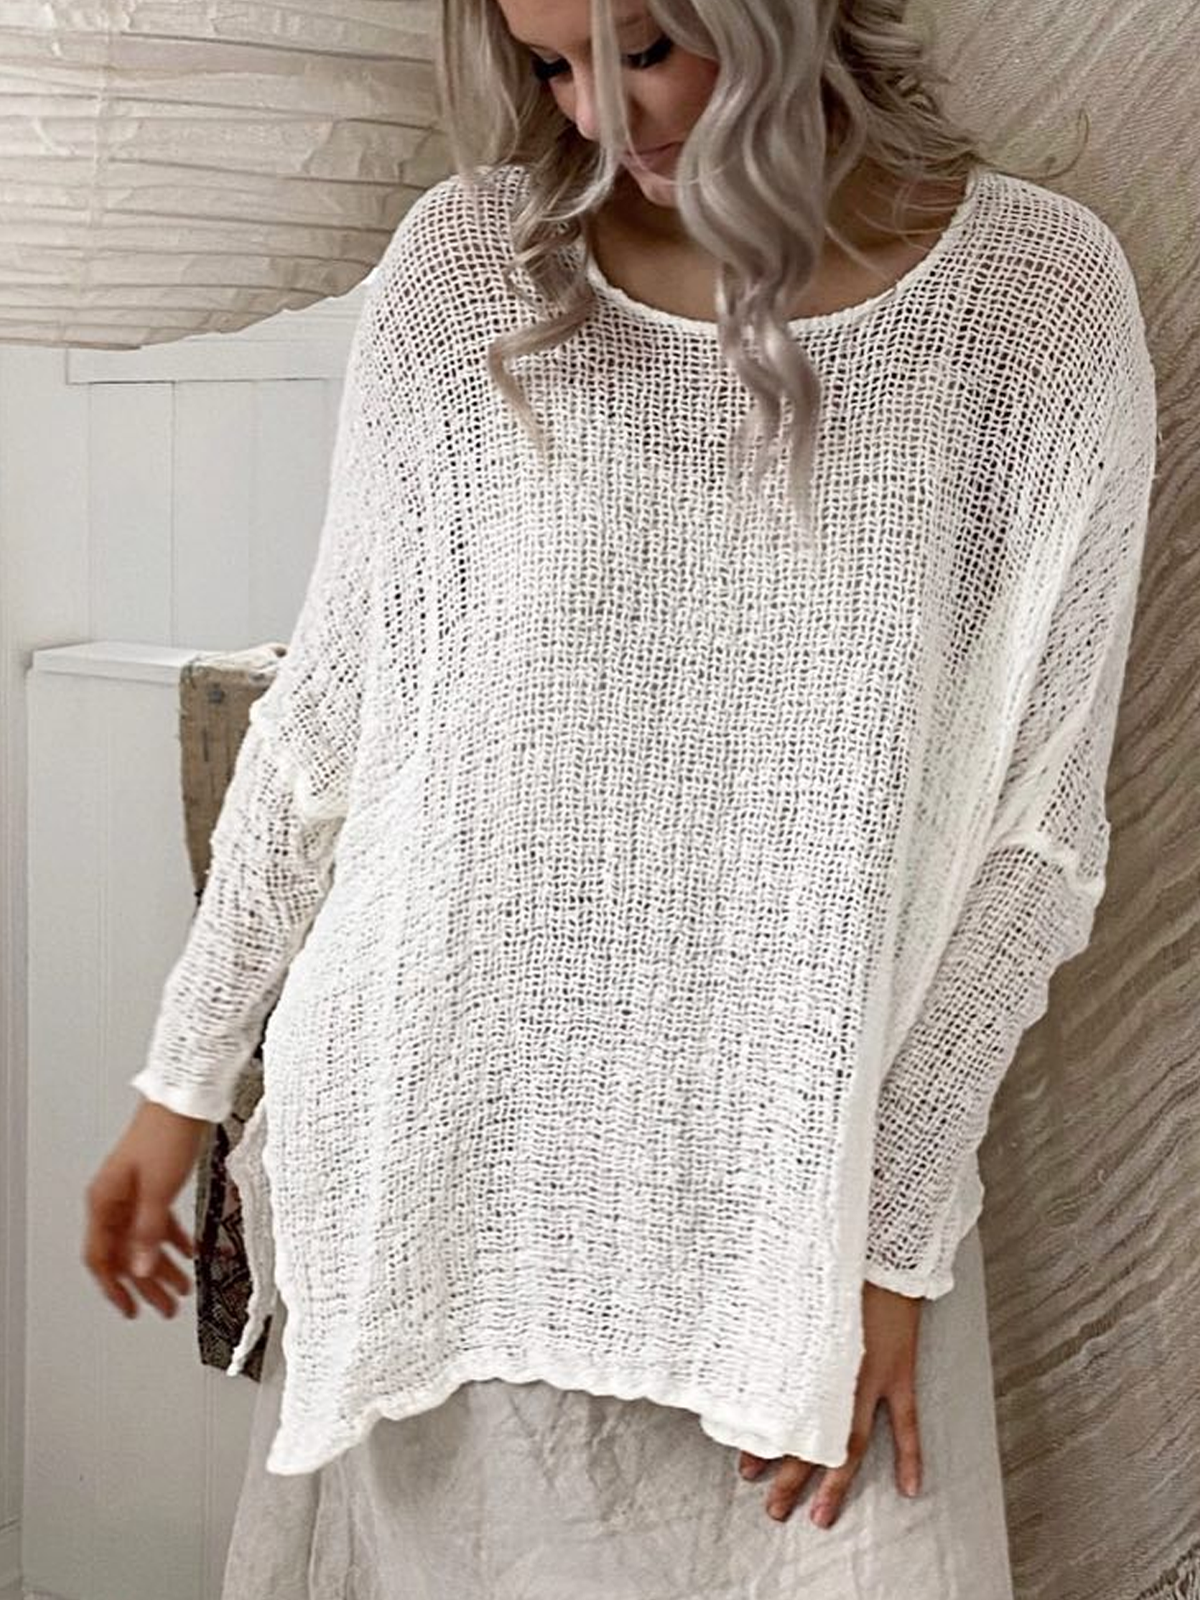 Women White Long Sleeve Lightweight breathable Cotton linen Tunic Top